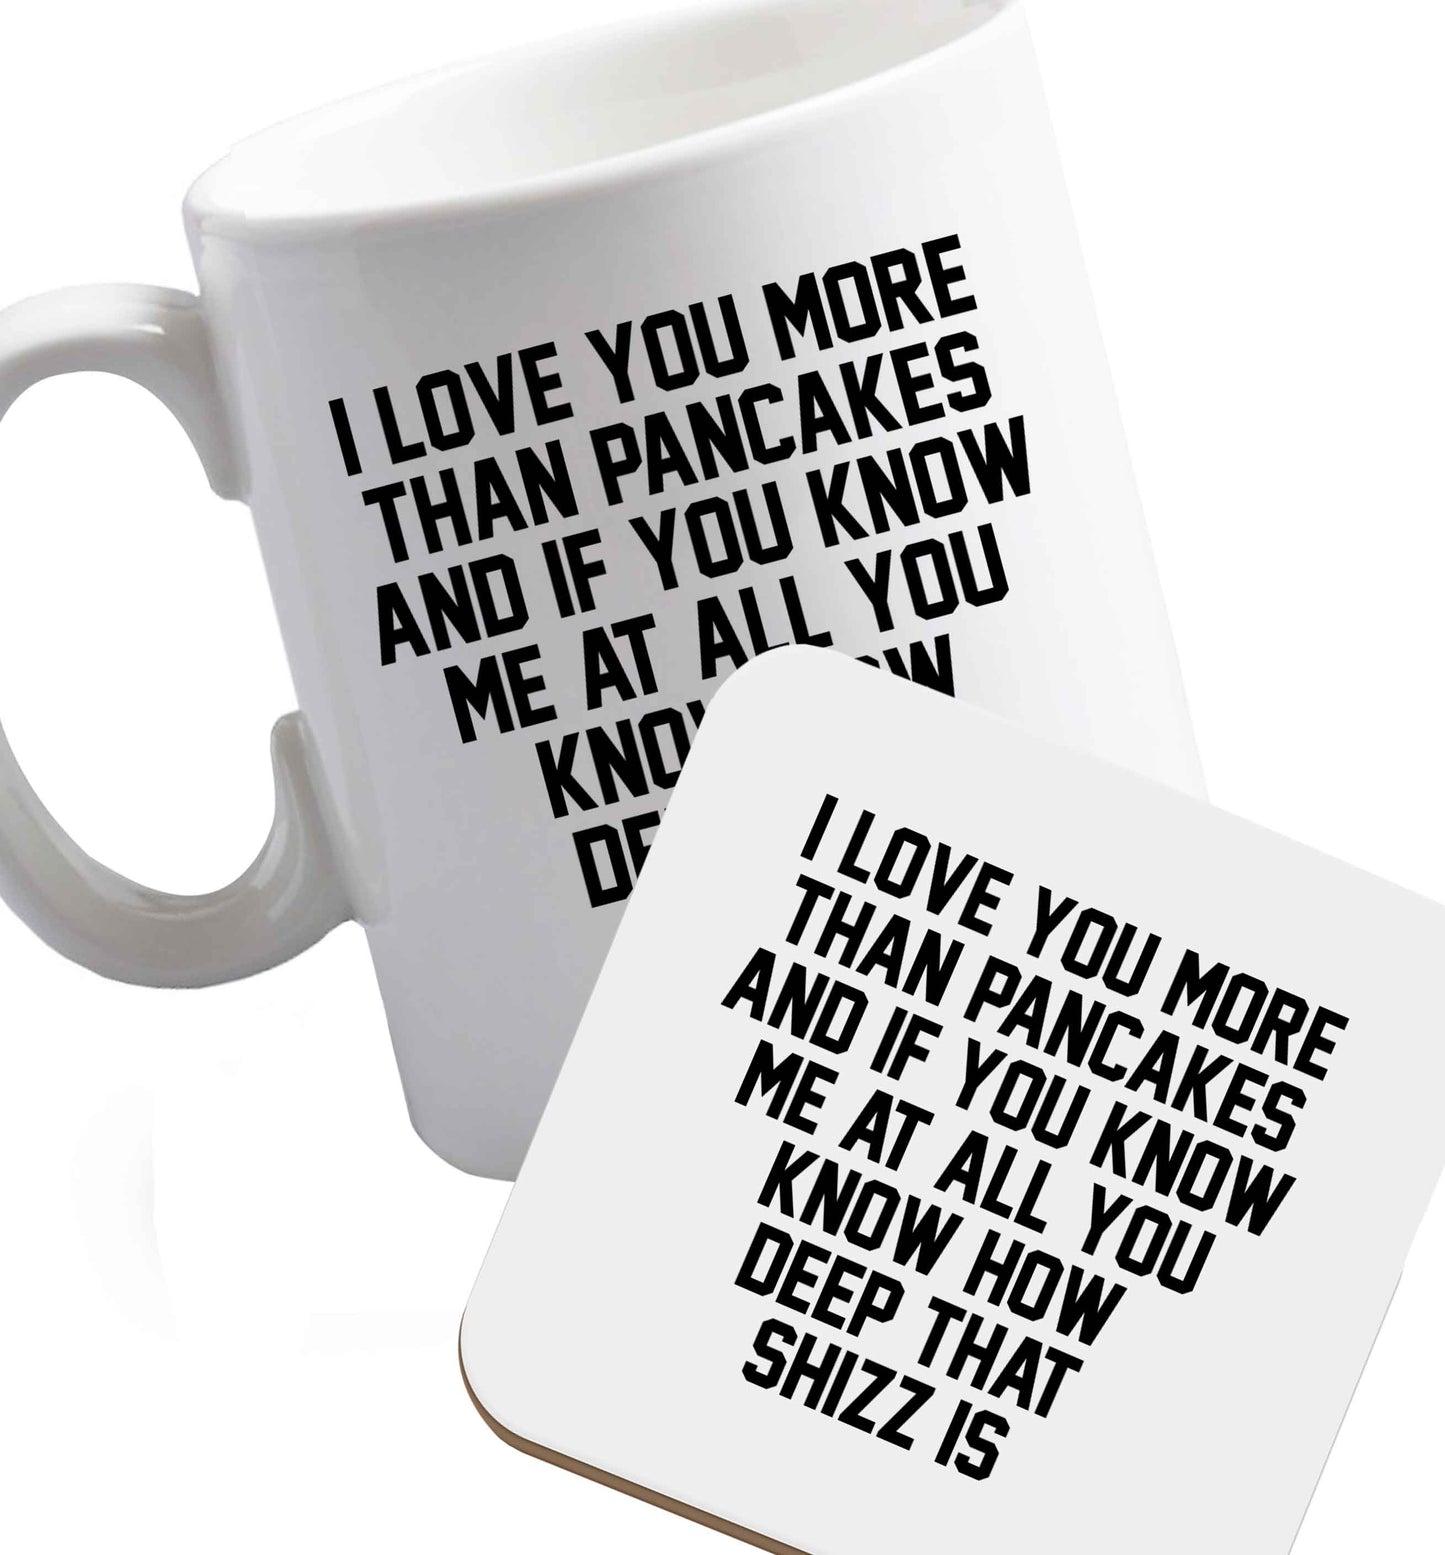 10 oz I love you more than pancakes and if you know me at all you know how deep that shizz is ceramic mug and coaster set right handed